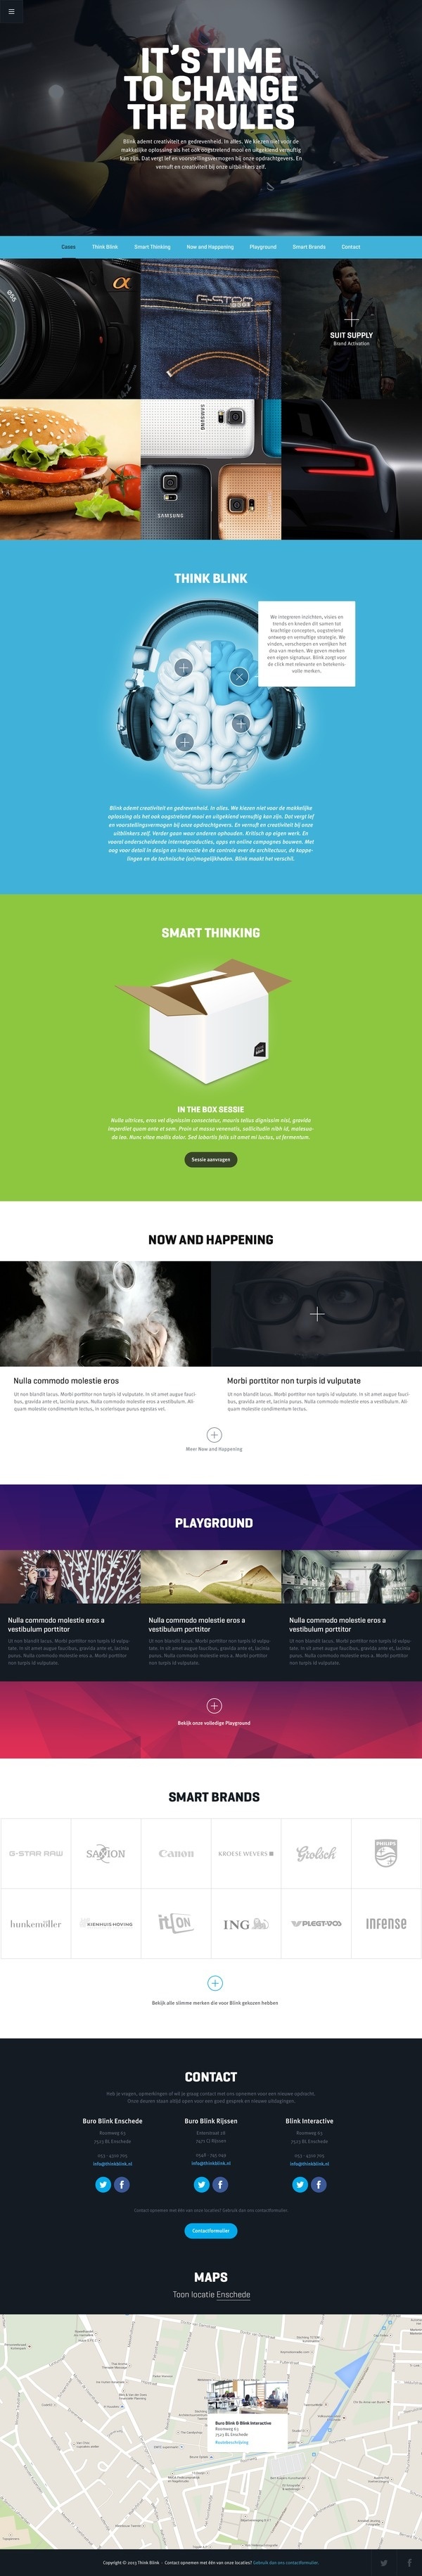 Homepages design idea #87: Think index #homepage #web